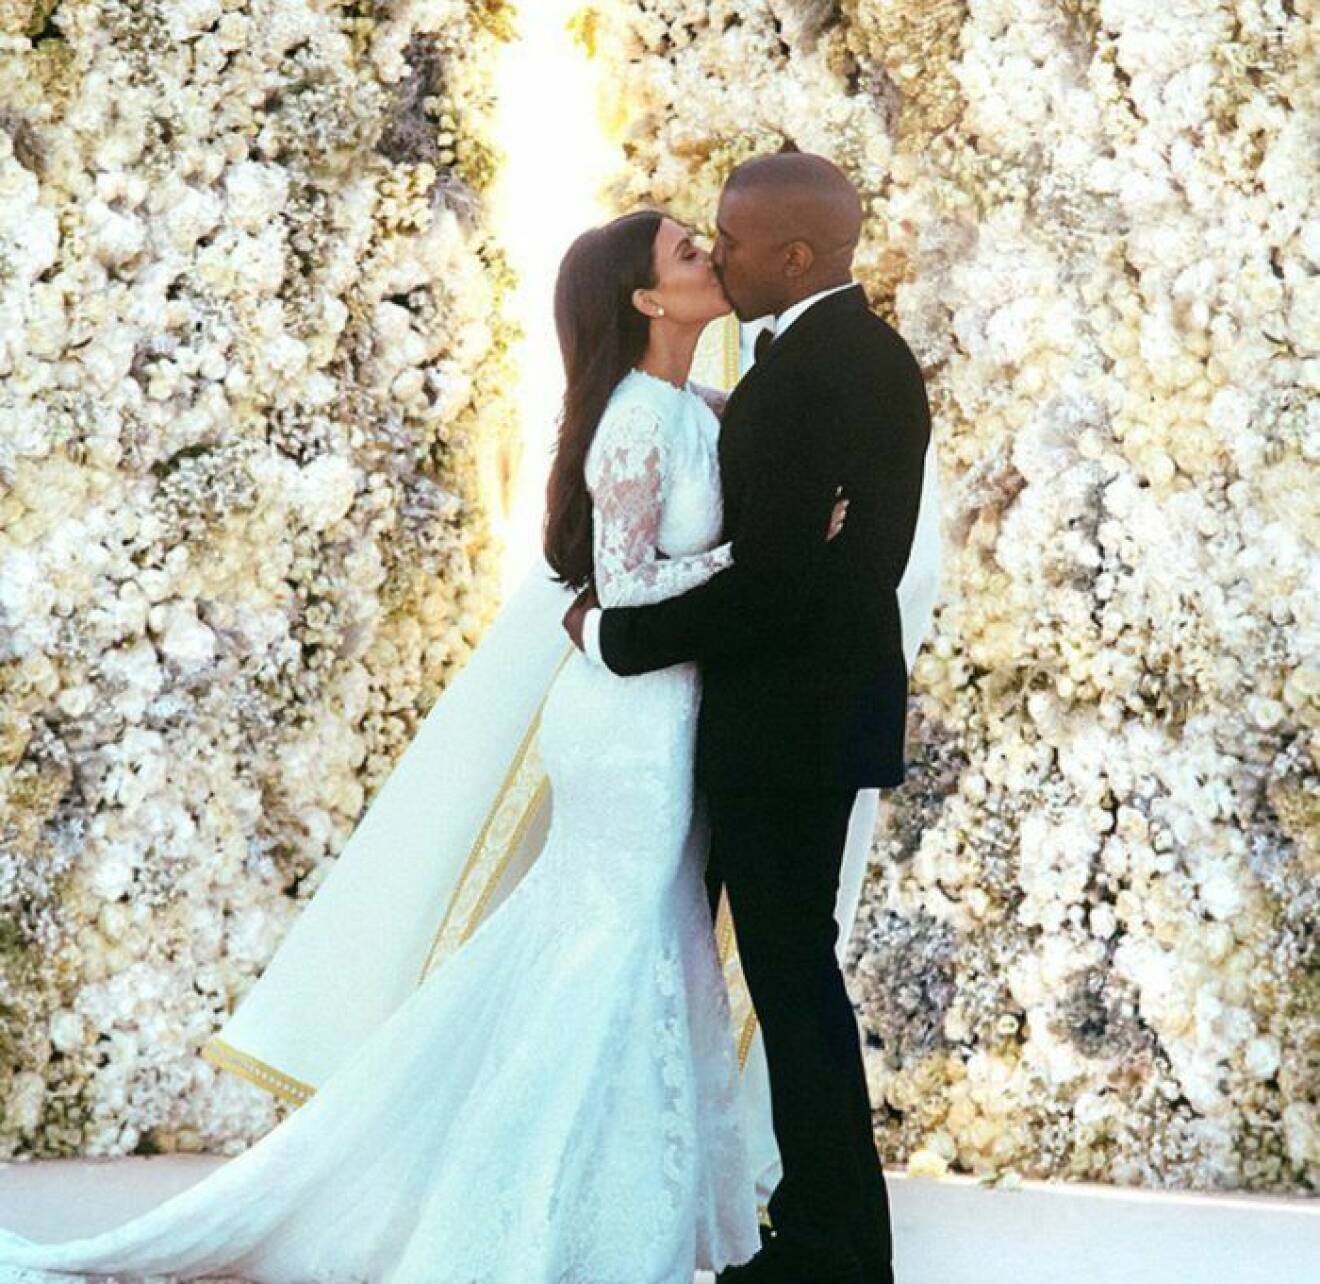 Kim Kardashian and Kanye West are seen kissing on their wedding day just moments after saying 'I do' at Forte di Belvedere in Florence, Italy -2014 REF NO : 74018 FOR EDITORIAL USE ONLY Scope Features Agency does not claim any Copyright or License in the attached material. Any downloading fees charged by Scope are for Scope services only, and do not, nor are they intended to, convey to the user any Copyright or License in the material. By publishing this material , the user expressly agrees to indemnify and to hold Scope harmless from any claims, demands, or causes of action arising out of or connected in any way with user's publication of the material.